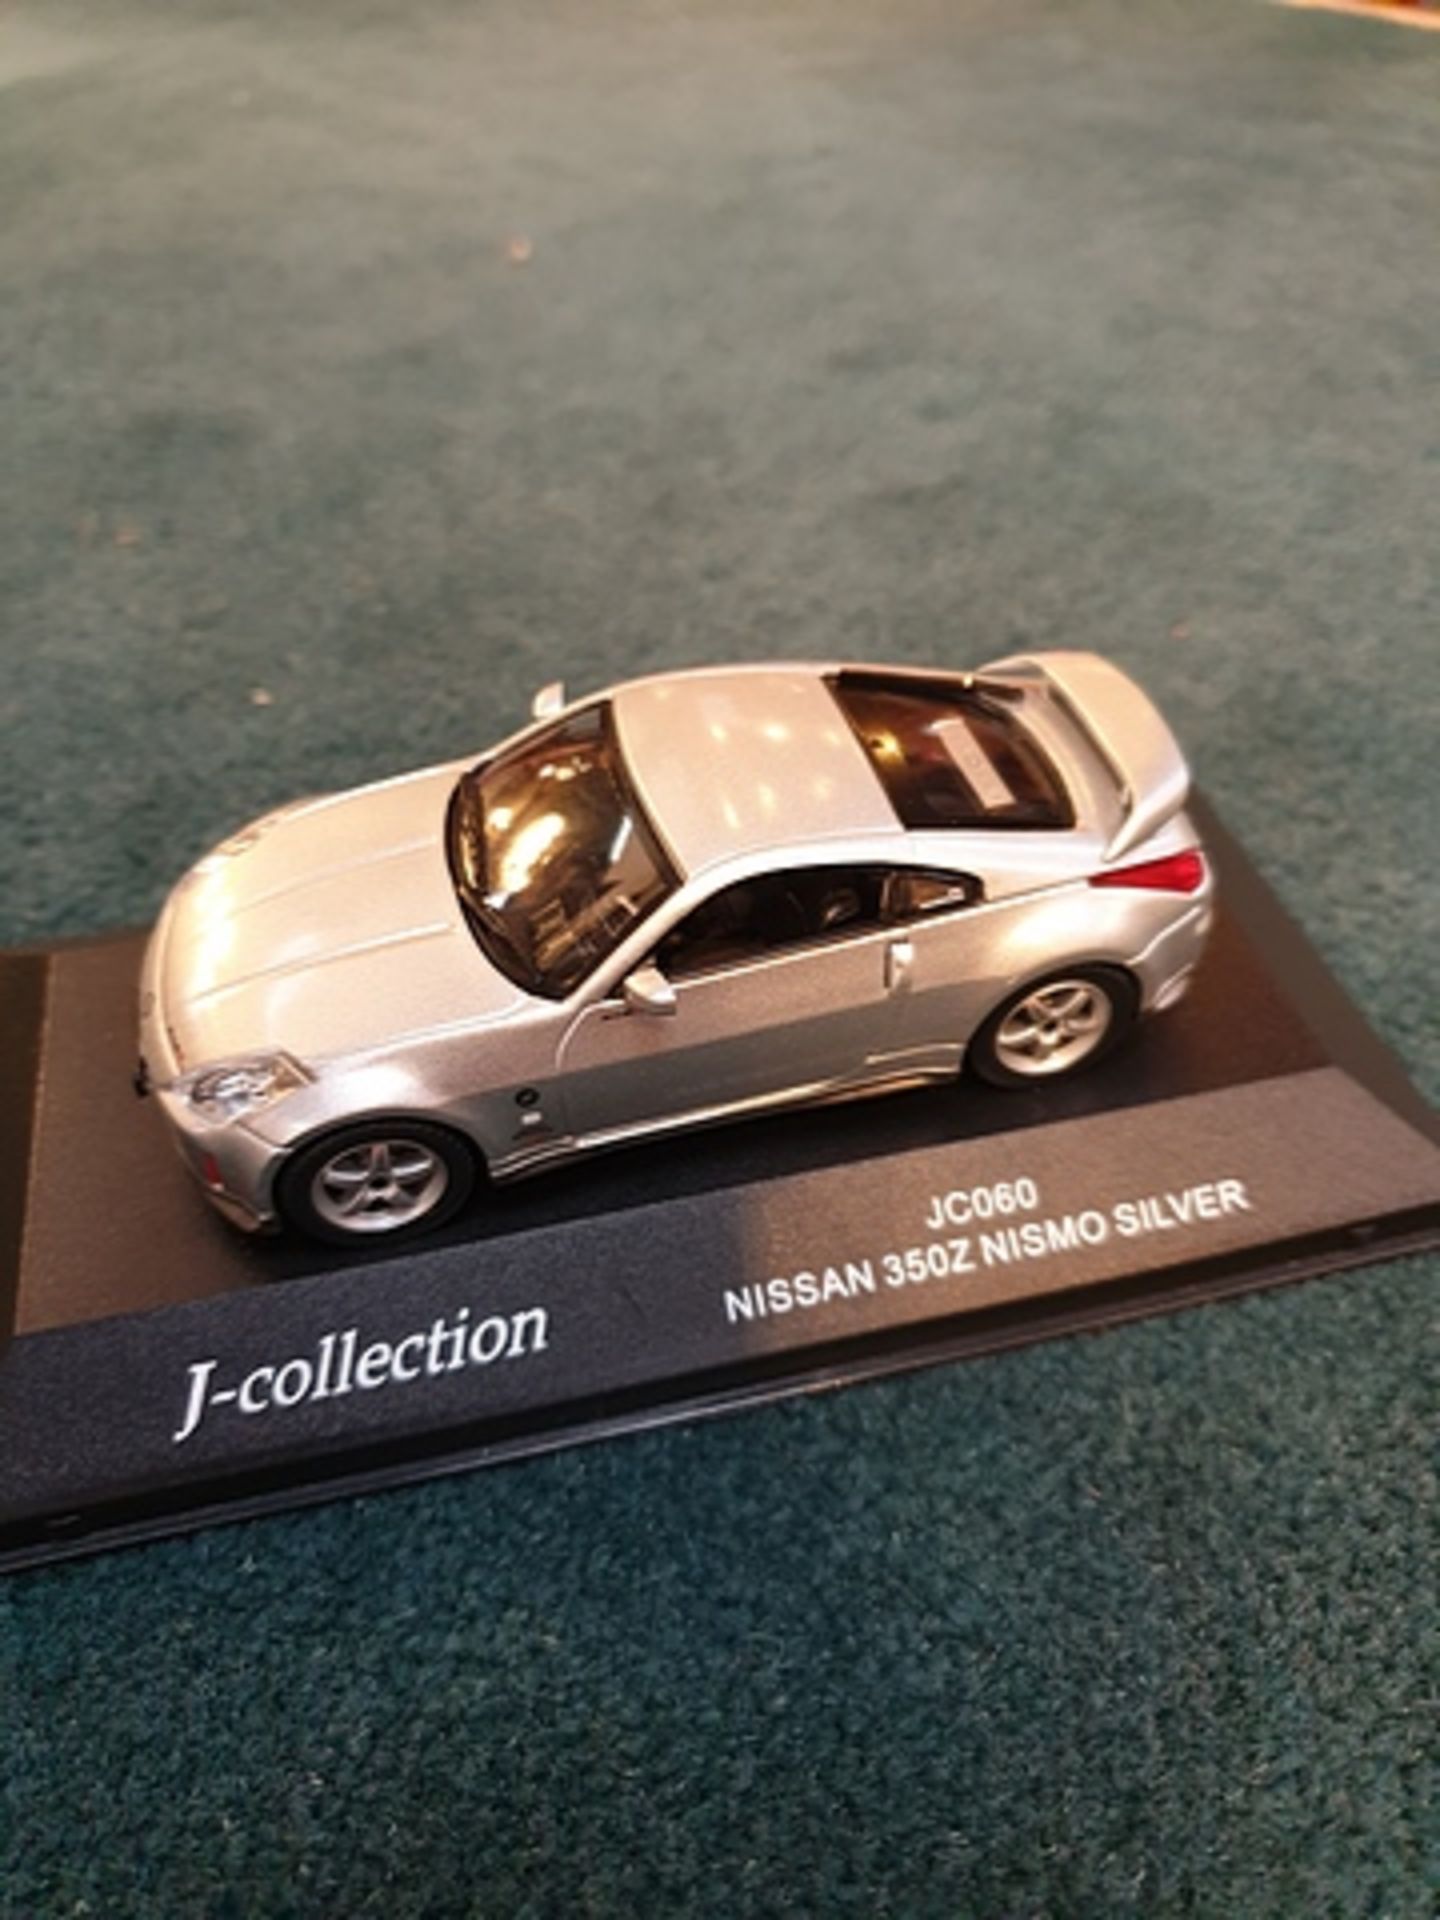 J-Collection Scale 1/43 Diecast Model JC060 Silver Nissan 350z Nismo Complete With Box